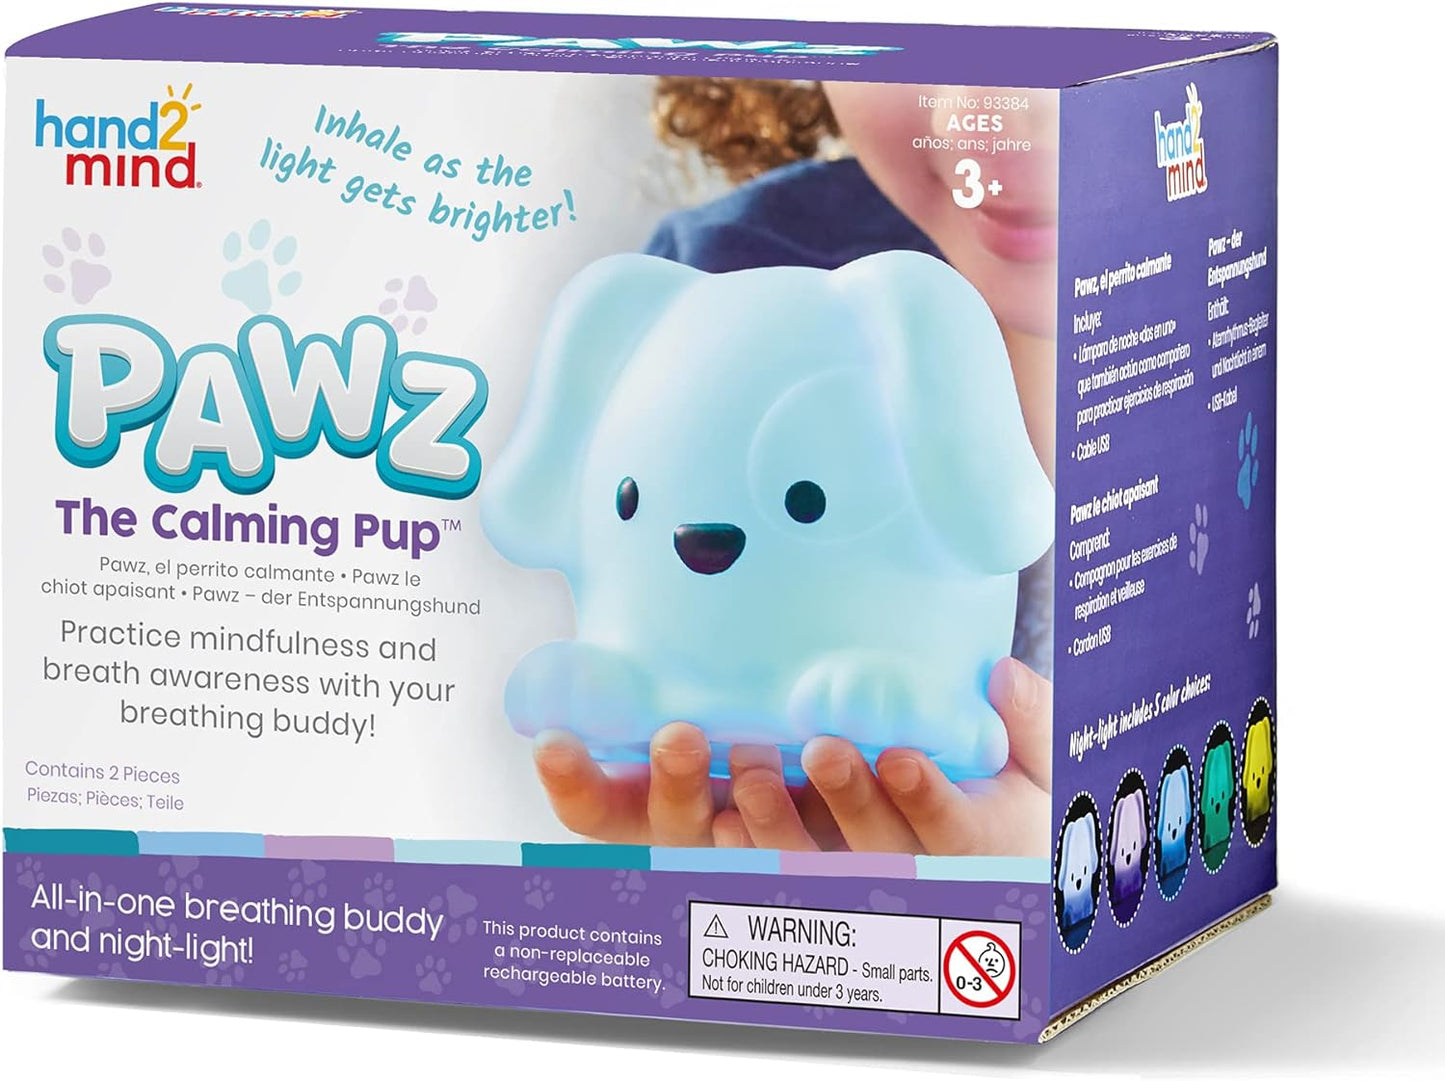 PAWZ the Calming Pup, Learn Deep Breathing, Rechargeable Animal Night Light, Kids Anxiety Relief, Mindfulness for Kids, Calm down Corner Supplies, Social Emotional Learning Activities